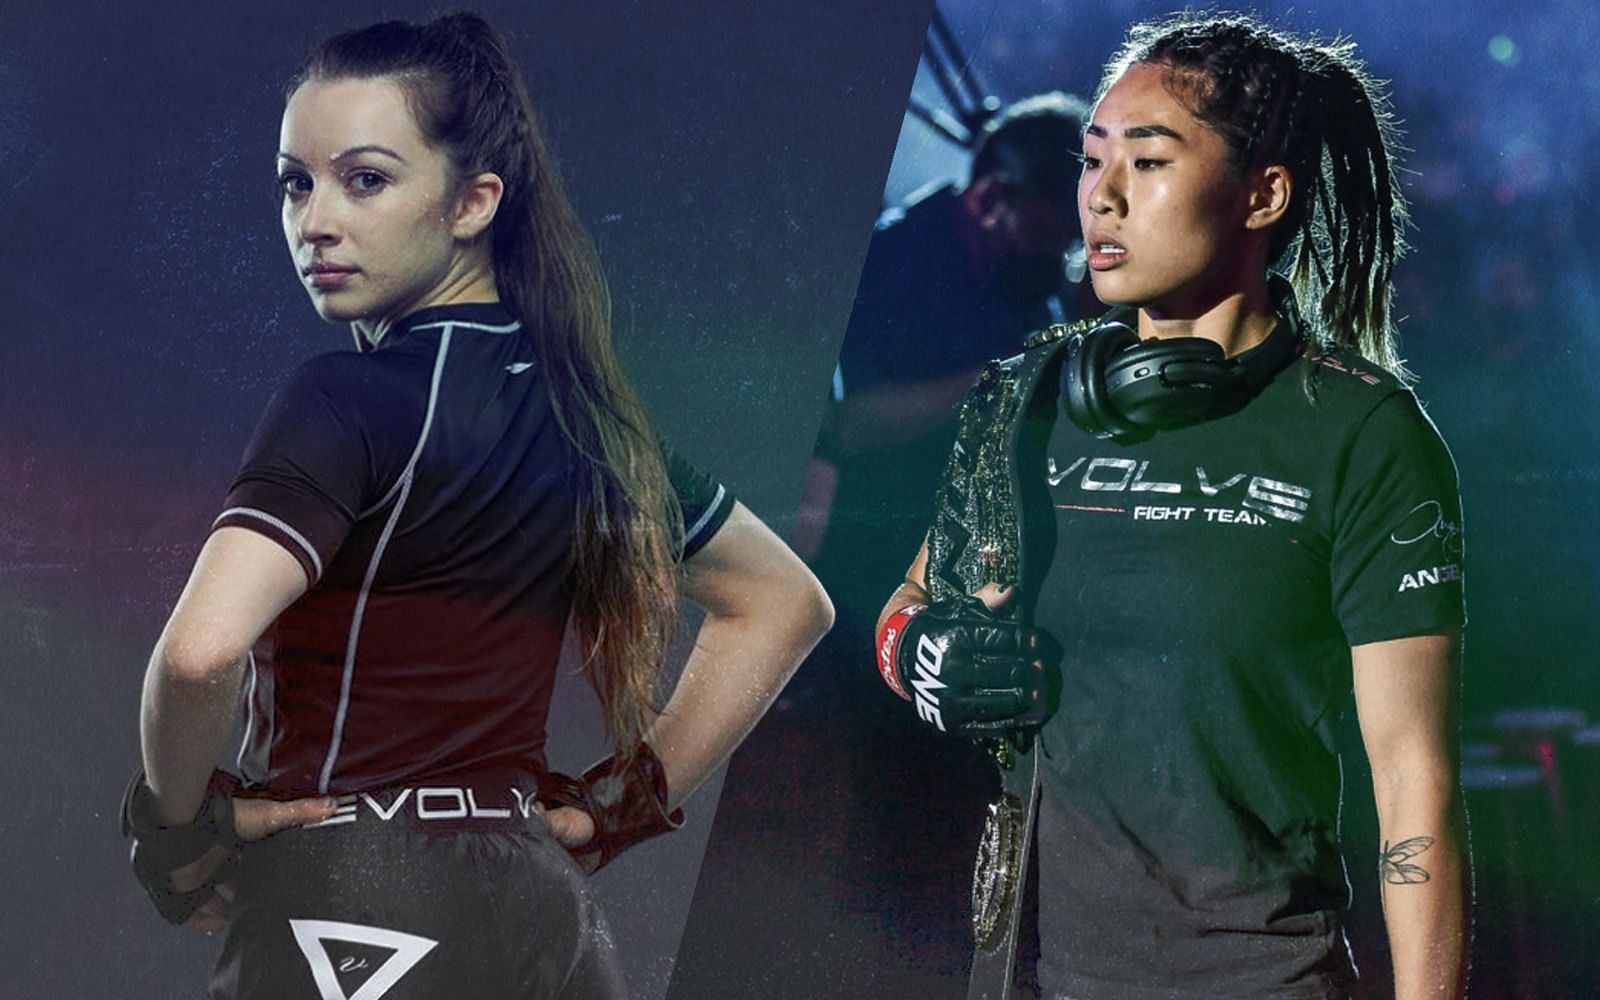 Danielle Lee (left) and Angela Lee (right) [Photo Credits: ONE Championship]